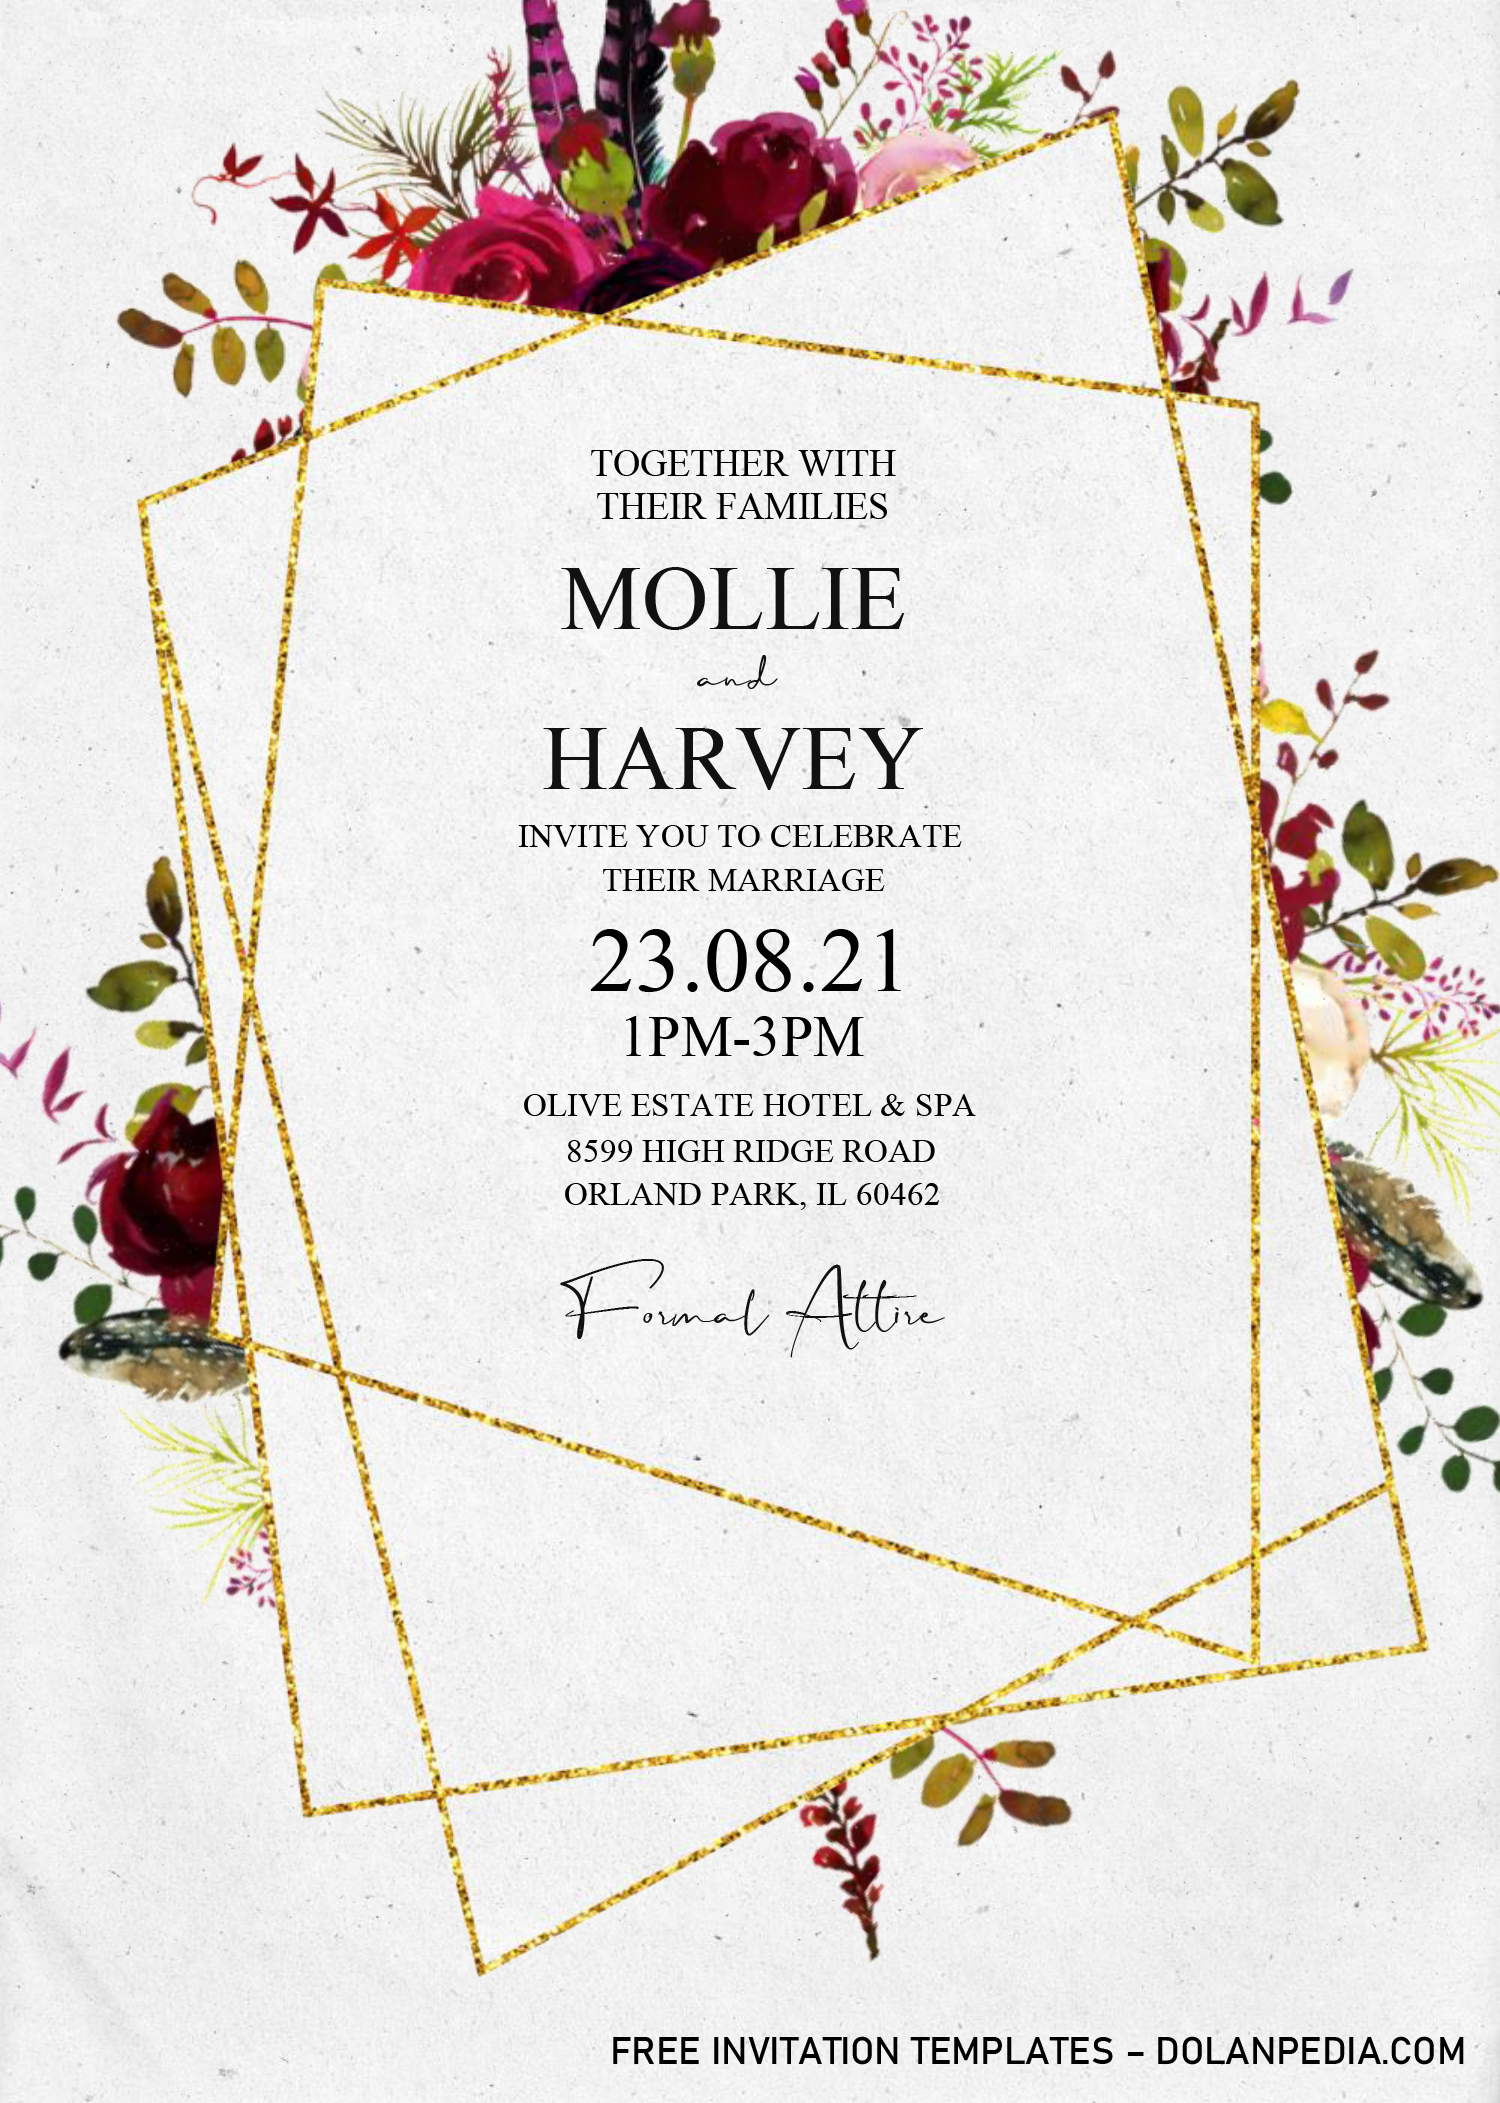 Floral And Gold Invitation Templates – Editable With MS Word | Dolanpedia